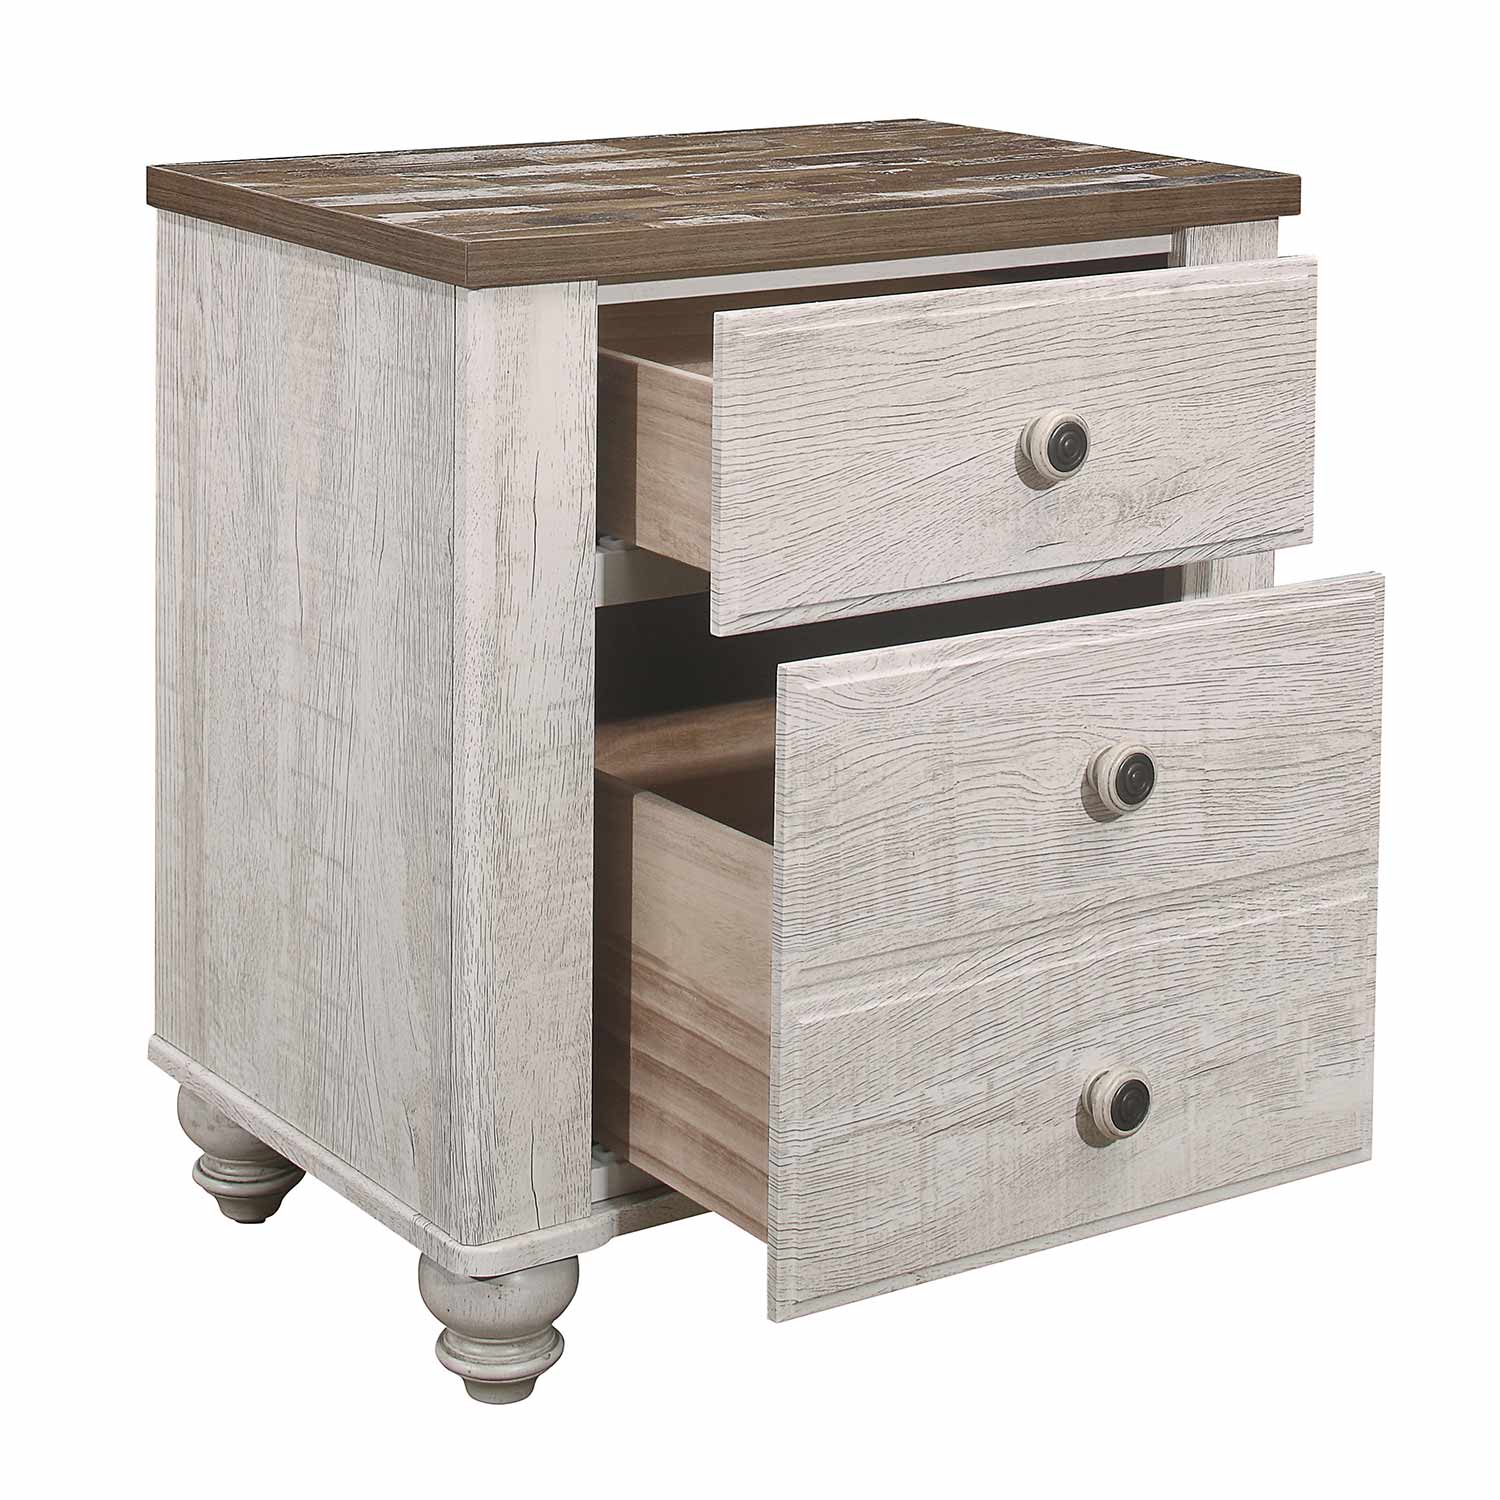 Homelegance Nashville Night Stand - Antique White and Brown